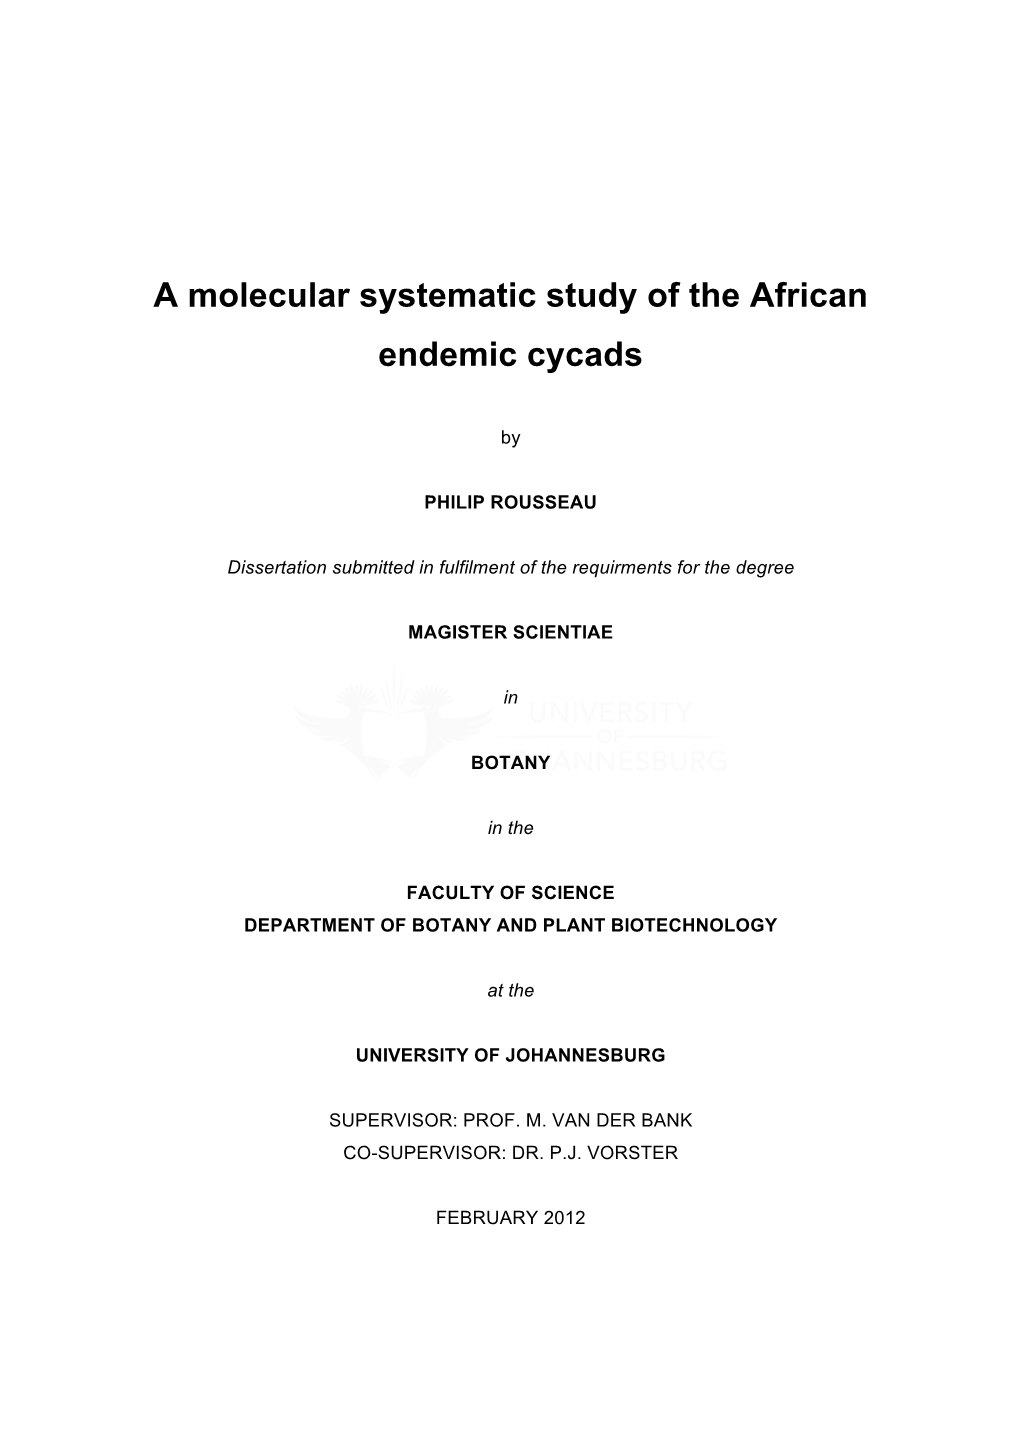 A Molecular Systematic Study of the African Endemic Cycads